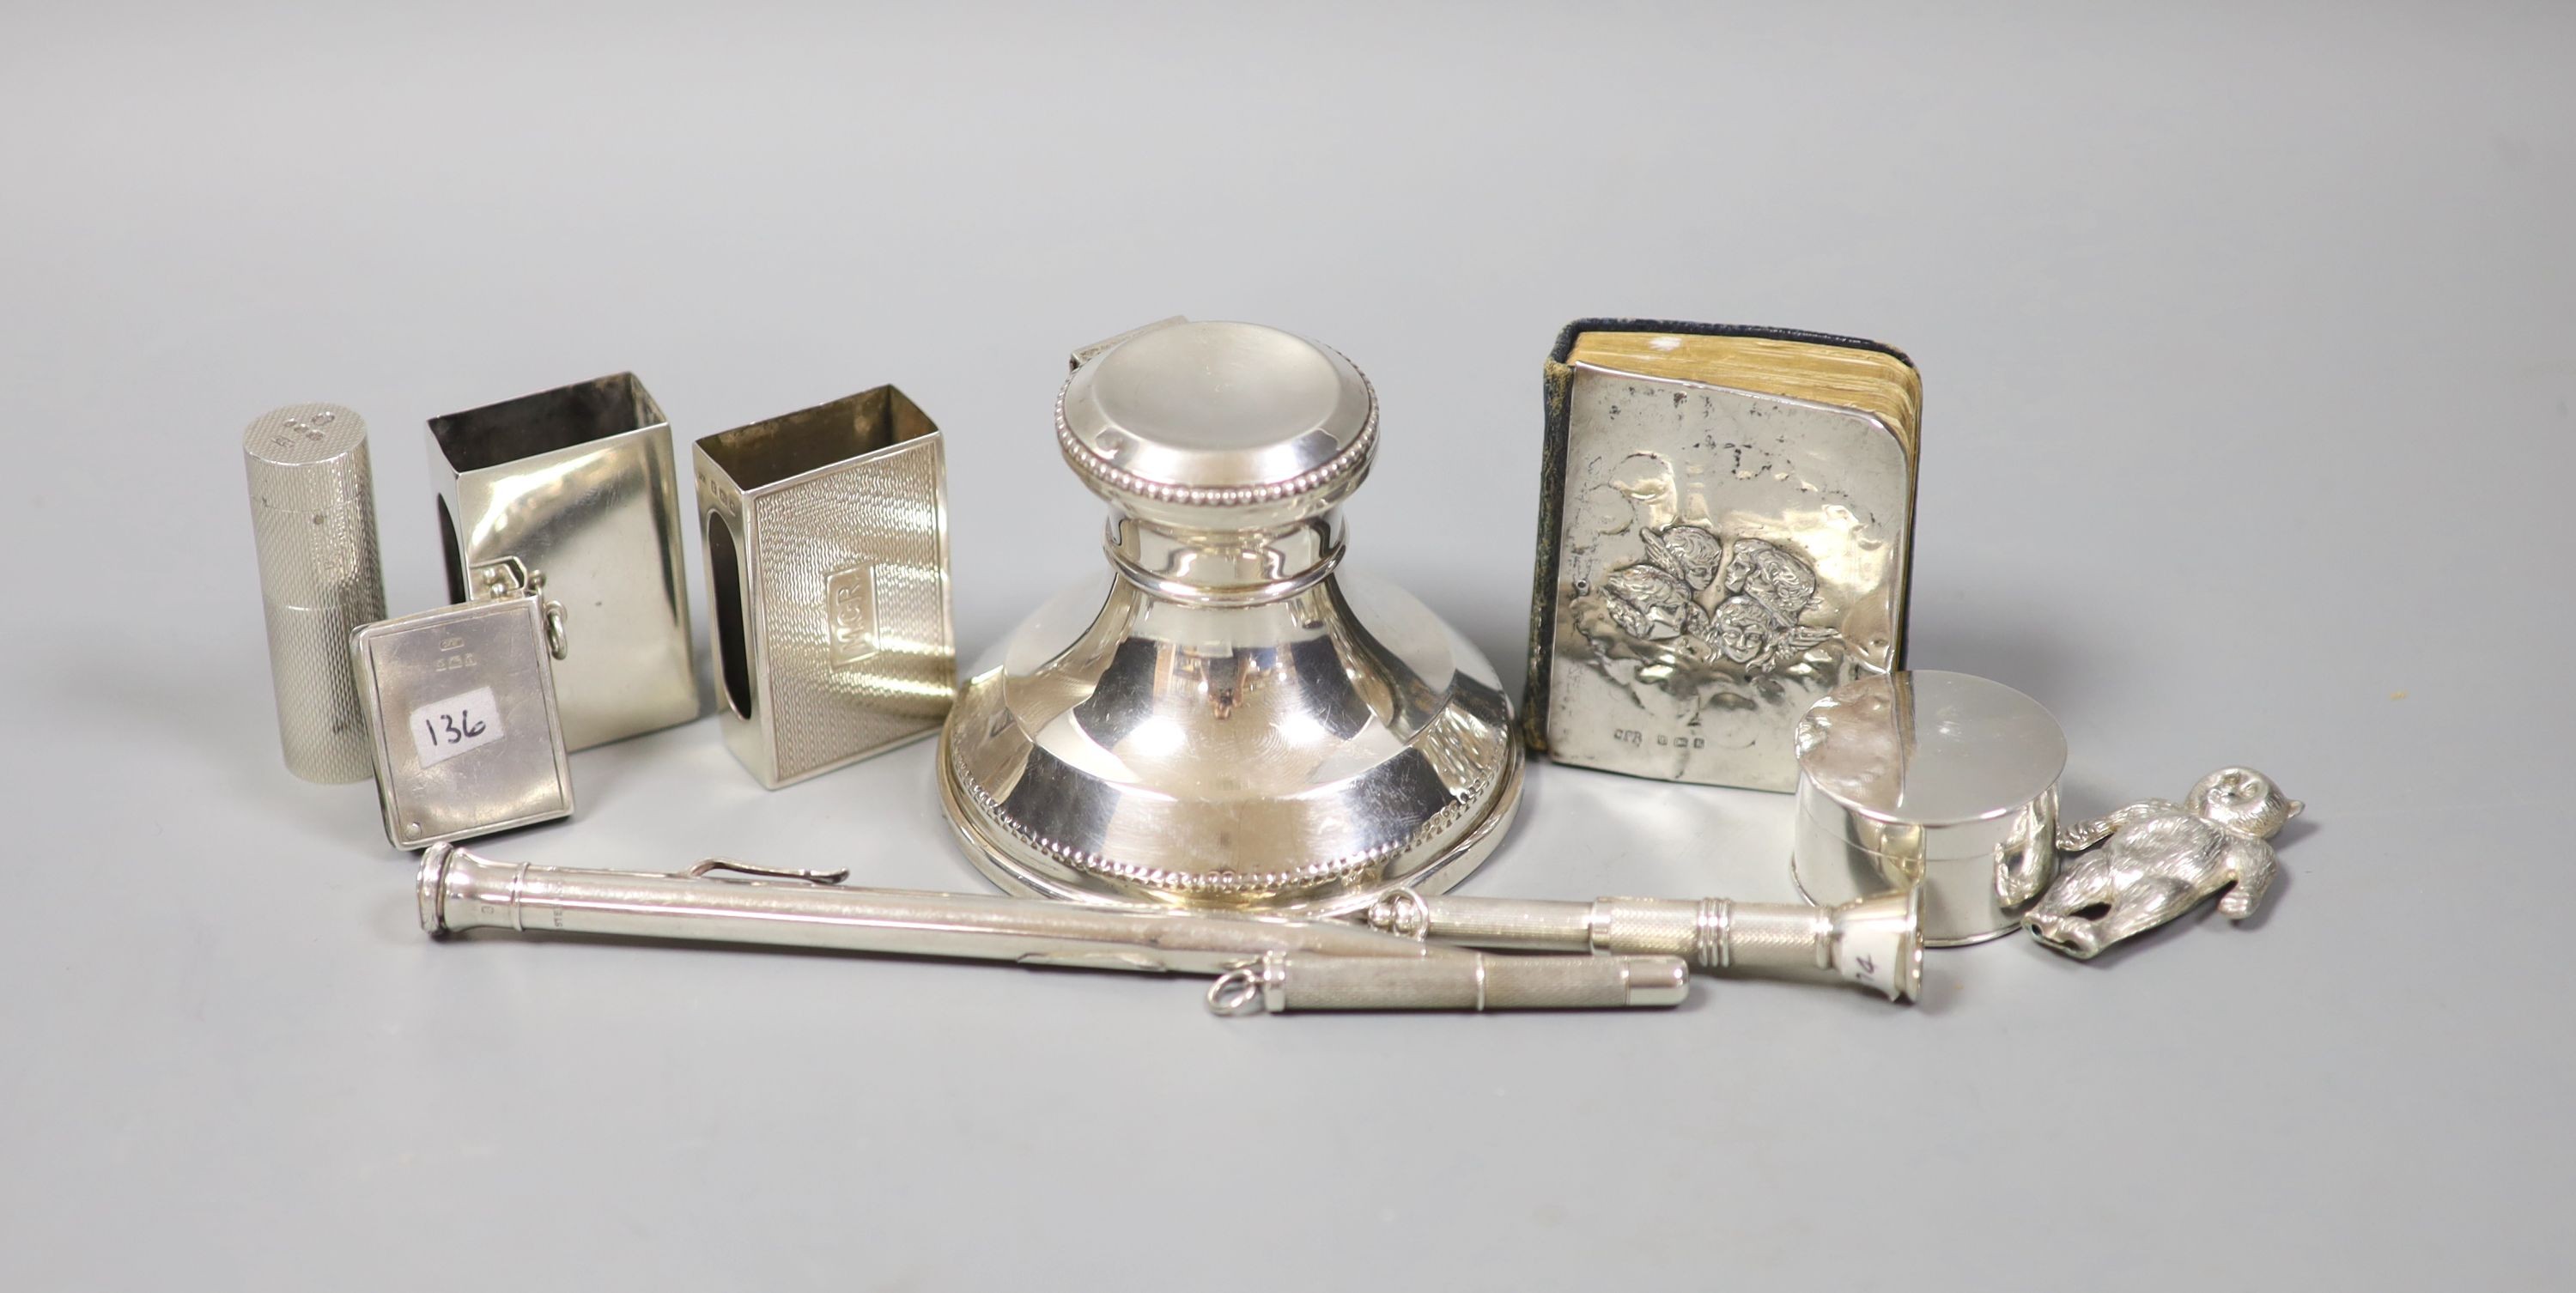 A silver mounted small inkwell, a silver mounted prayer book and other small silver including match sleeves, lipstick holder, cigar piercer, pen and Georgian pill box by Phipps & Robinson.